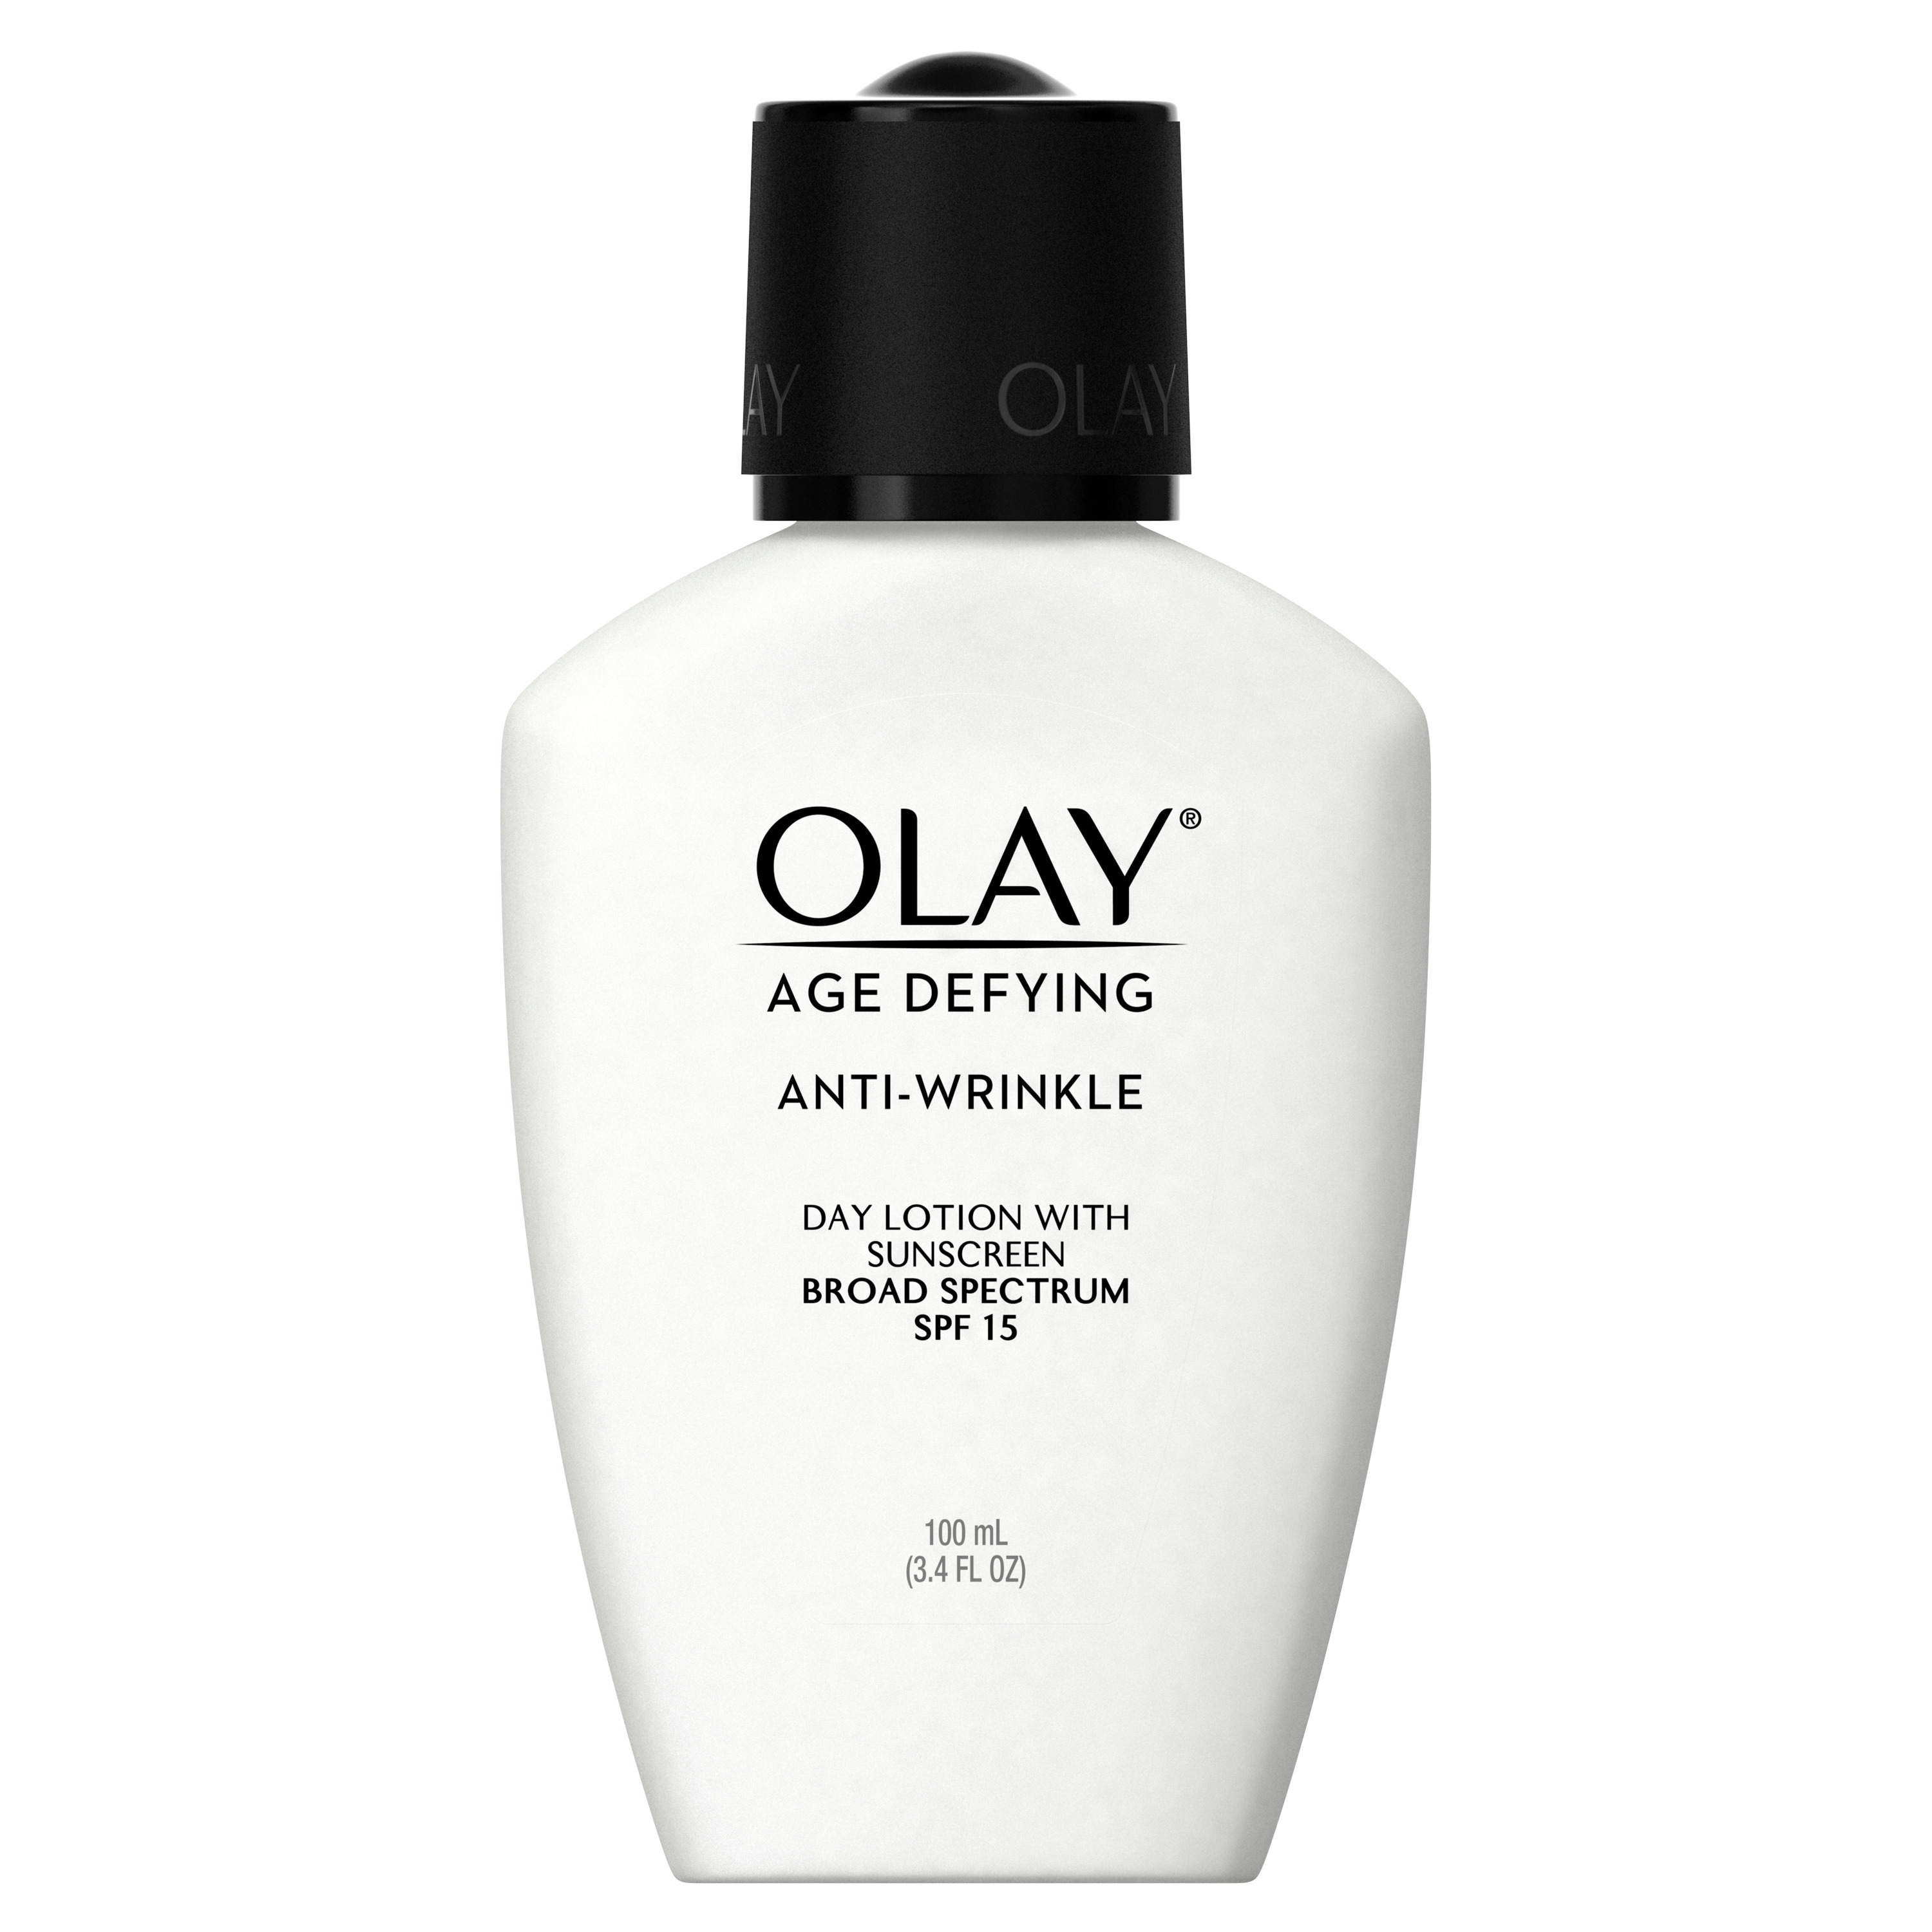 Olay Age Defying Anti-Wrinkle Day Face Lotion with Sunscreen SPF 15, For All Skin Types, 3.4 fl oz - image 2 of 8